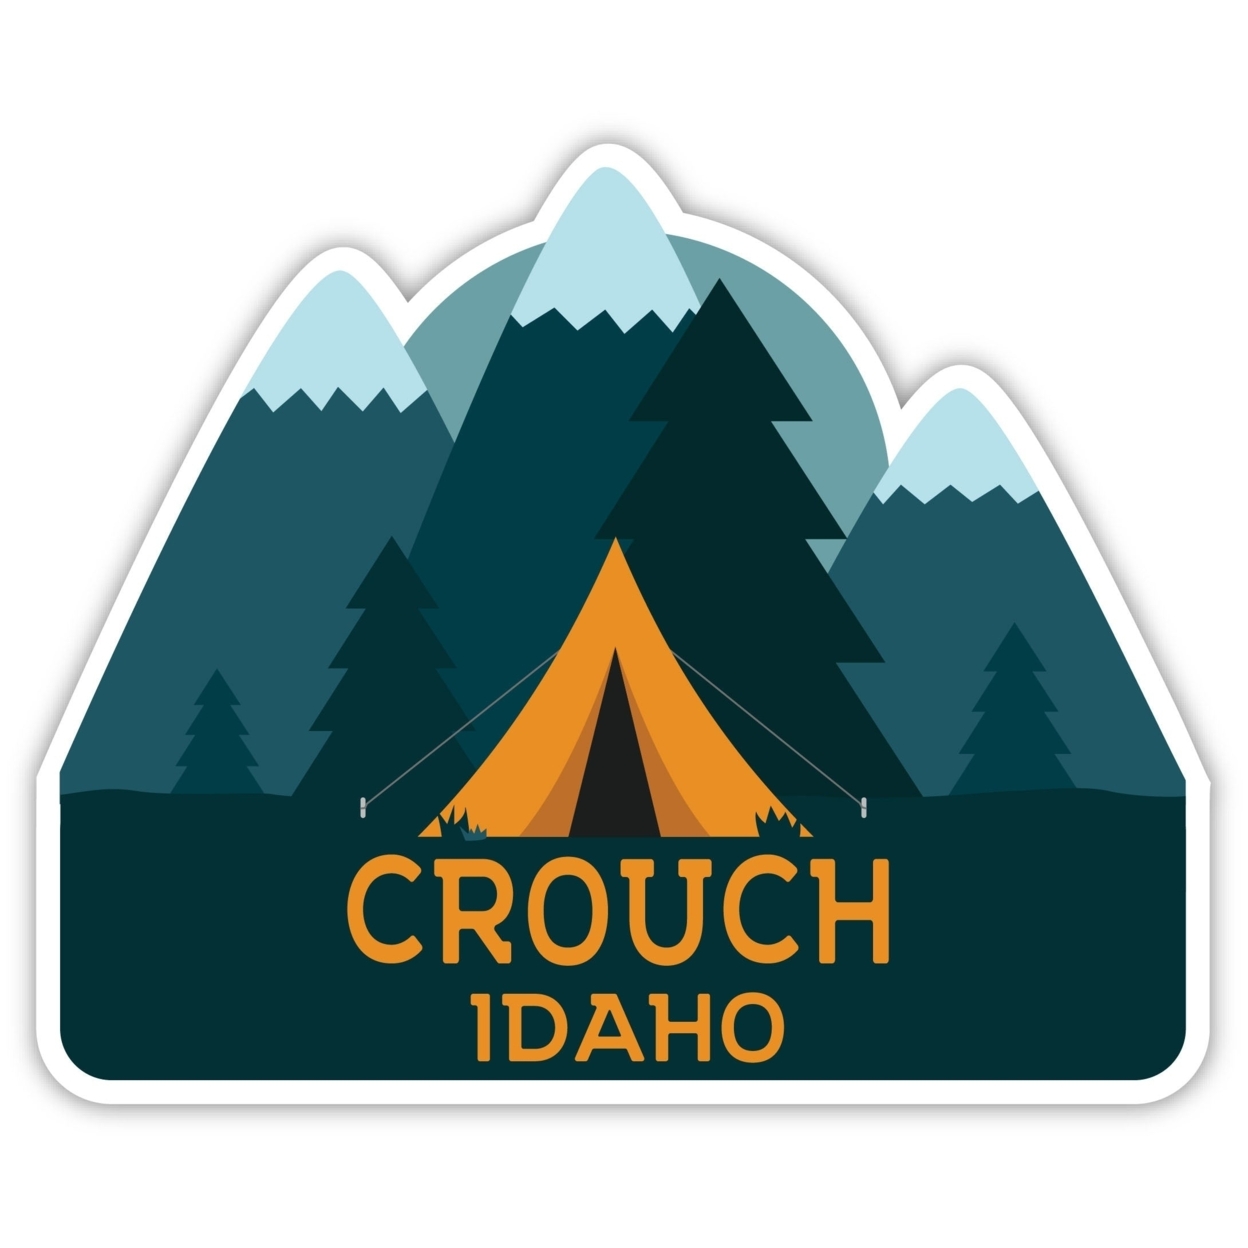 Crouch Idaho Souvenir Decorative Stickers (Choose Theme And Size) - 4-Pack, 12-Inch, Tent